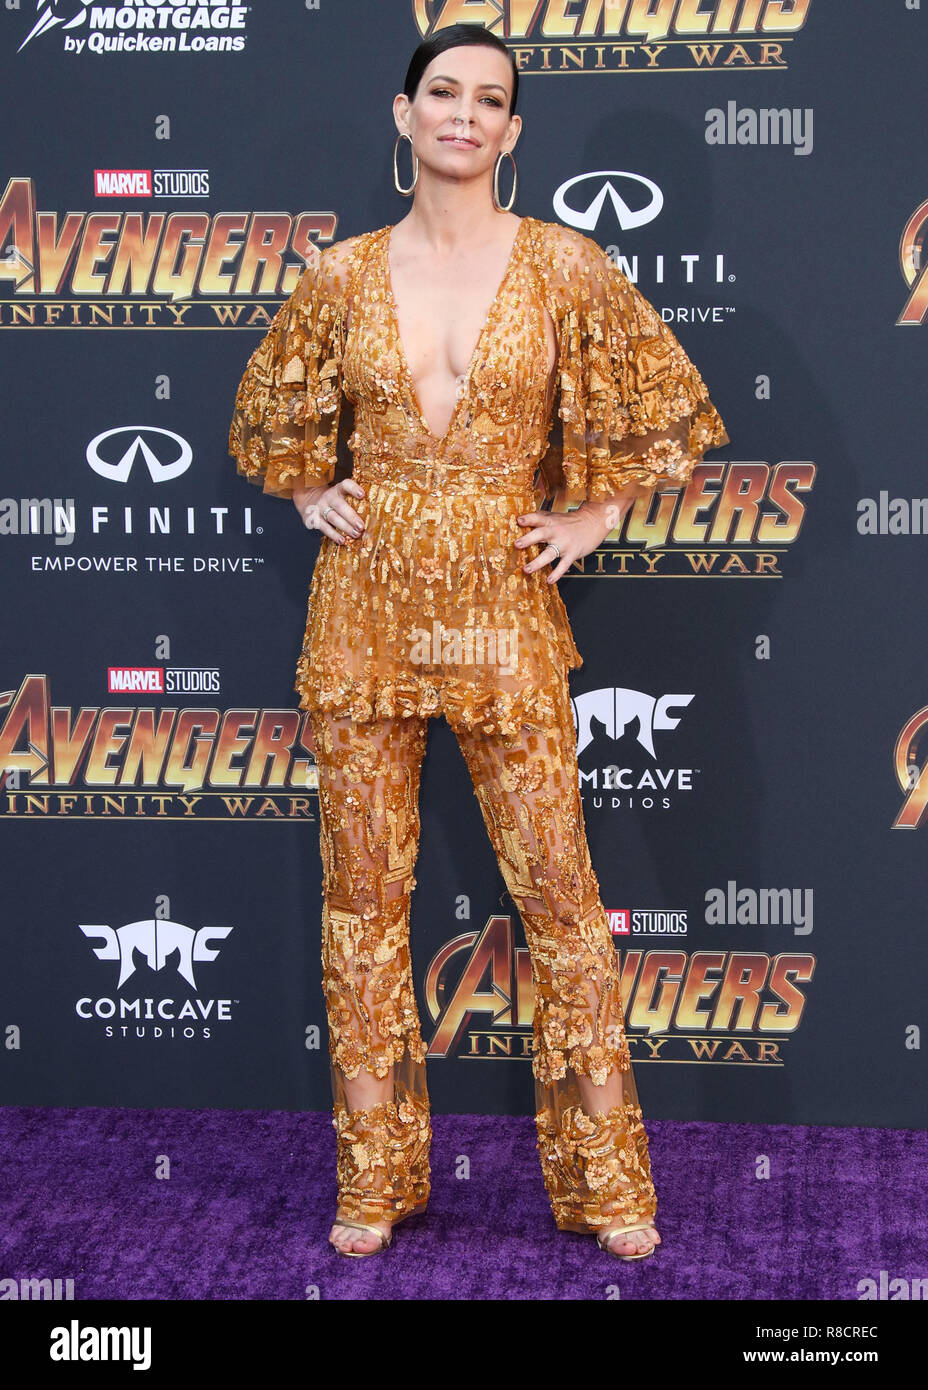 HOLLYWOOD, LOS ANGELES, CA, USA - APRIL 23: Evangeline Lilly at the World Premiere Of Disney And Marvel's 'Avengers: Infinity War' held at the El Capitan Theatre, Dolby Theatre and TCL Chinese Theatre IMAX on April 23, 2018 in Hollywood, Los Angeles, California, United States. (Photo by Xavier Collin/Image Press Agency) Stock Photo